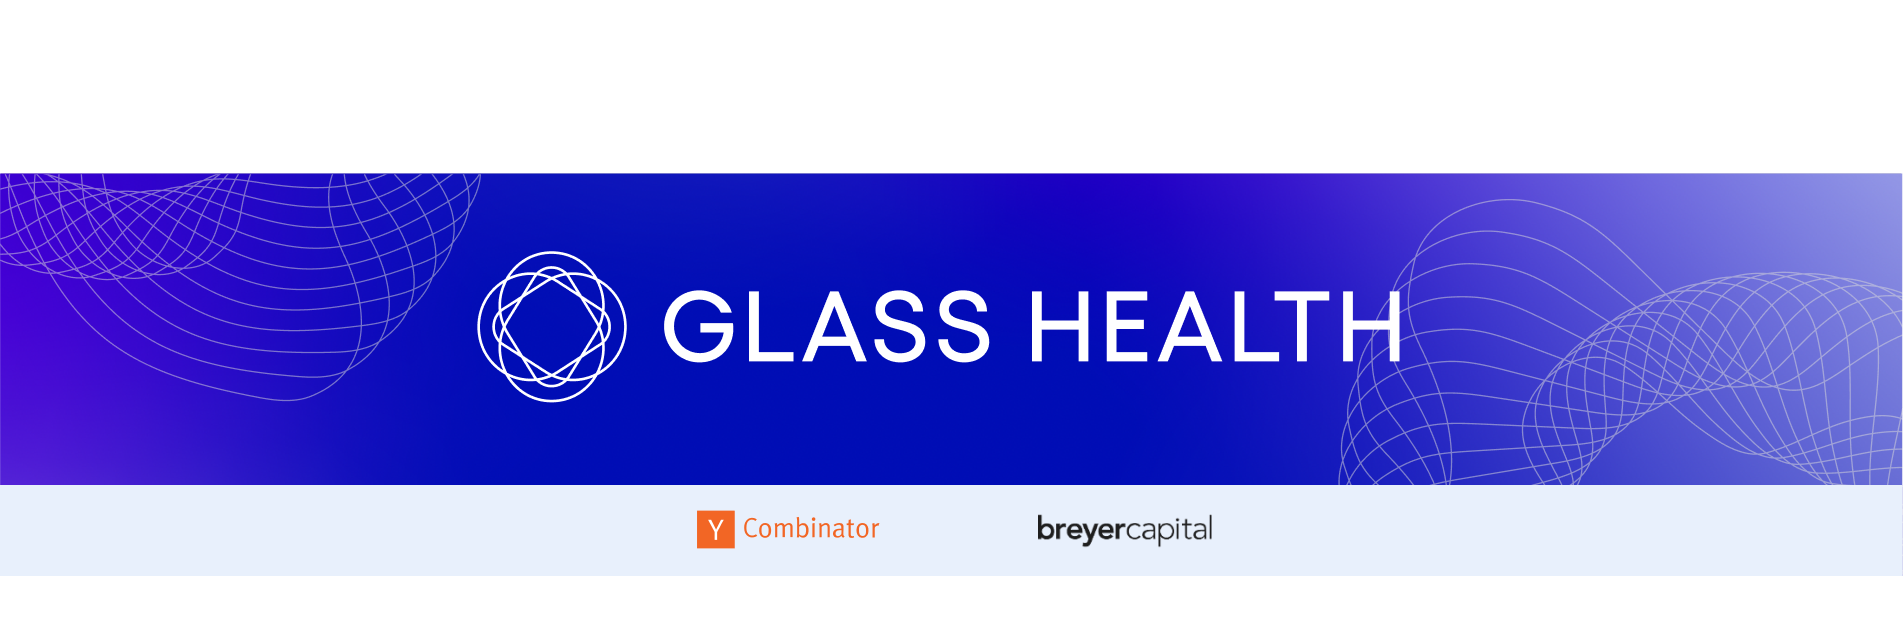 Glass Health Raises Investment from Breyer Capital and Y Combinator for a New Generation of Clinical Software